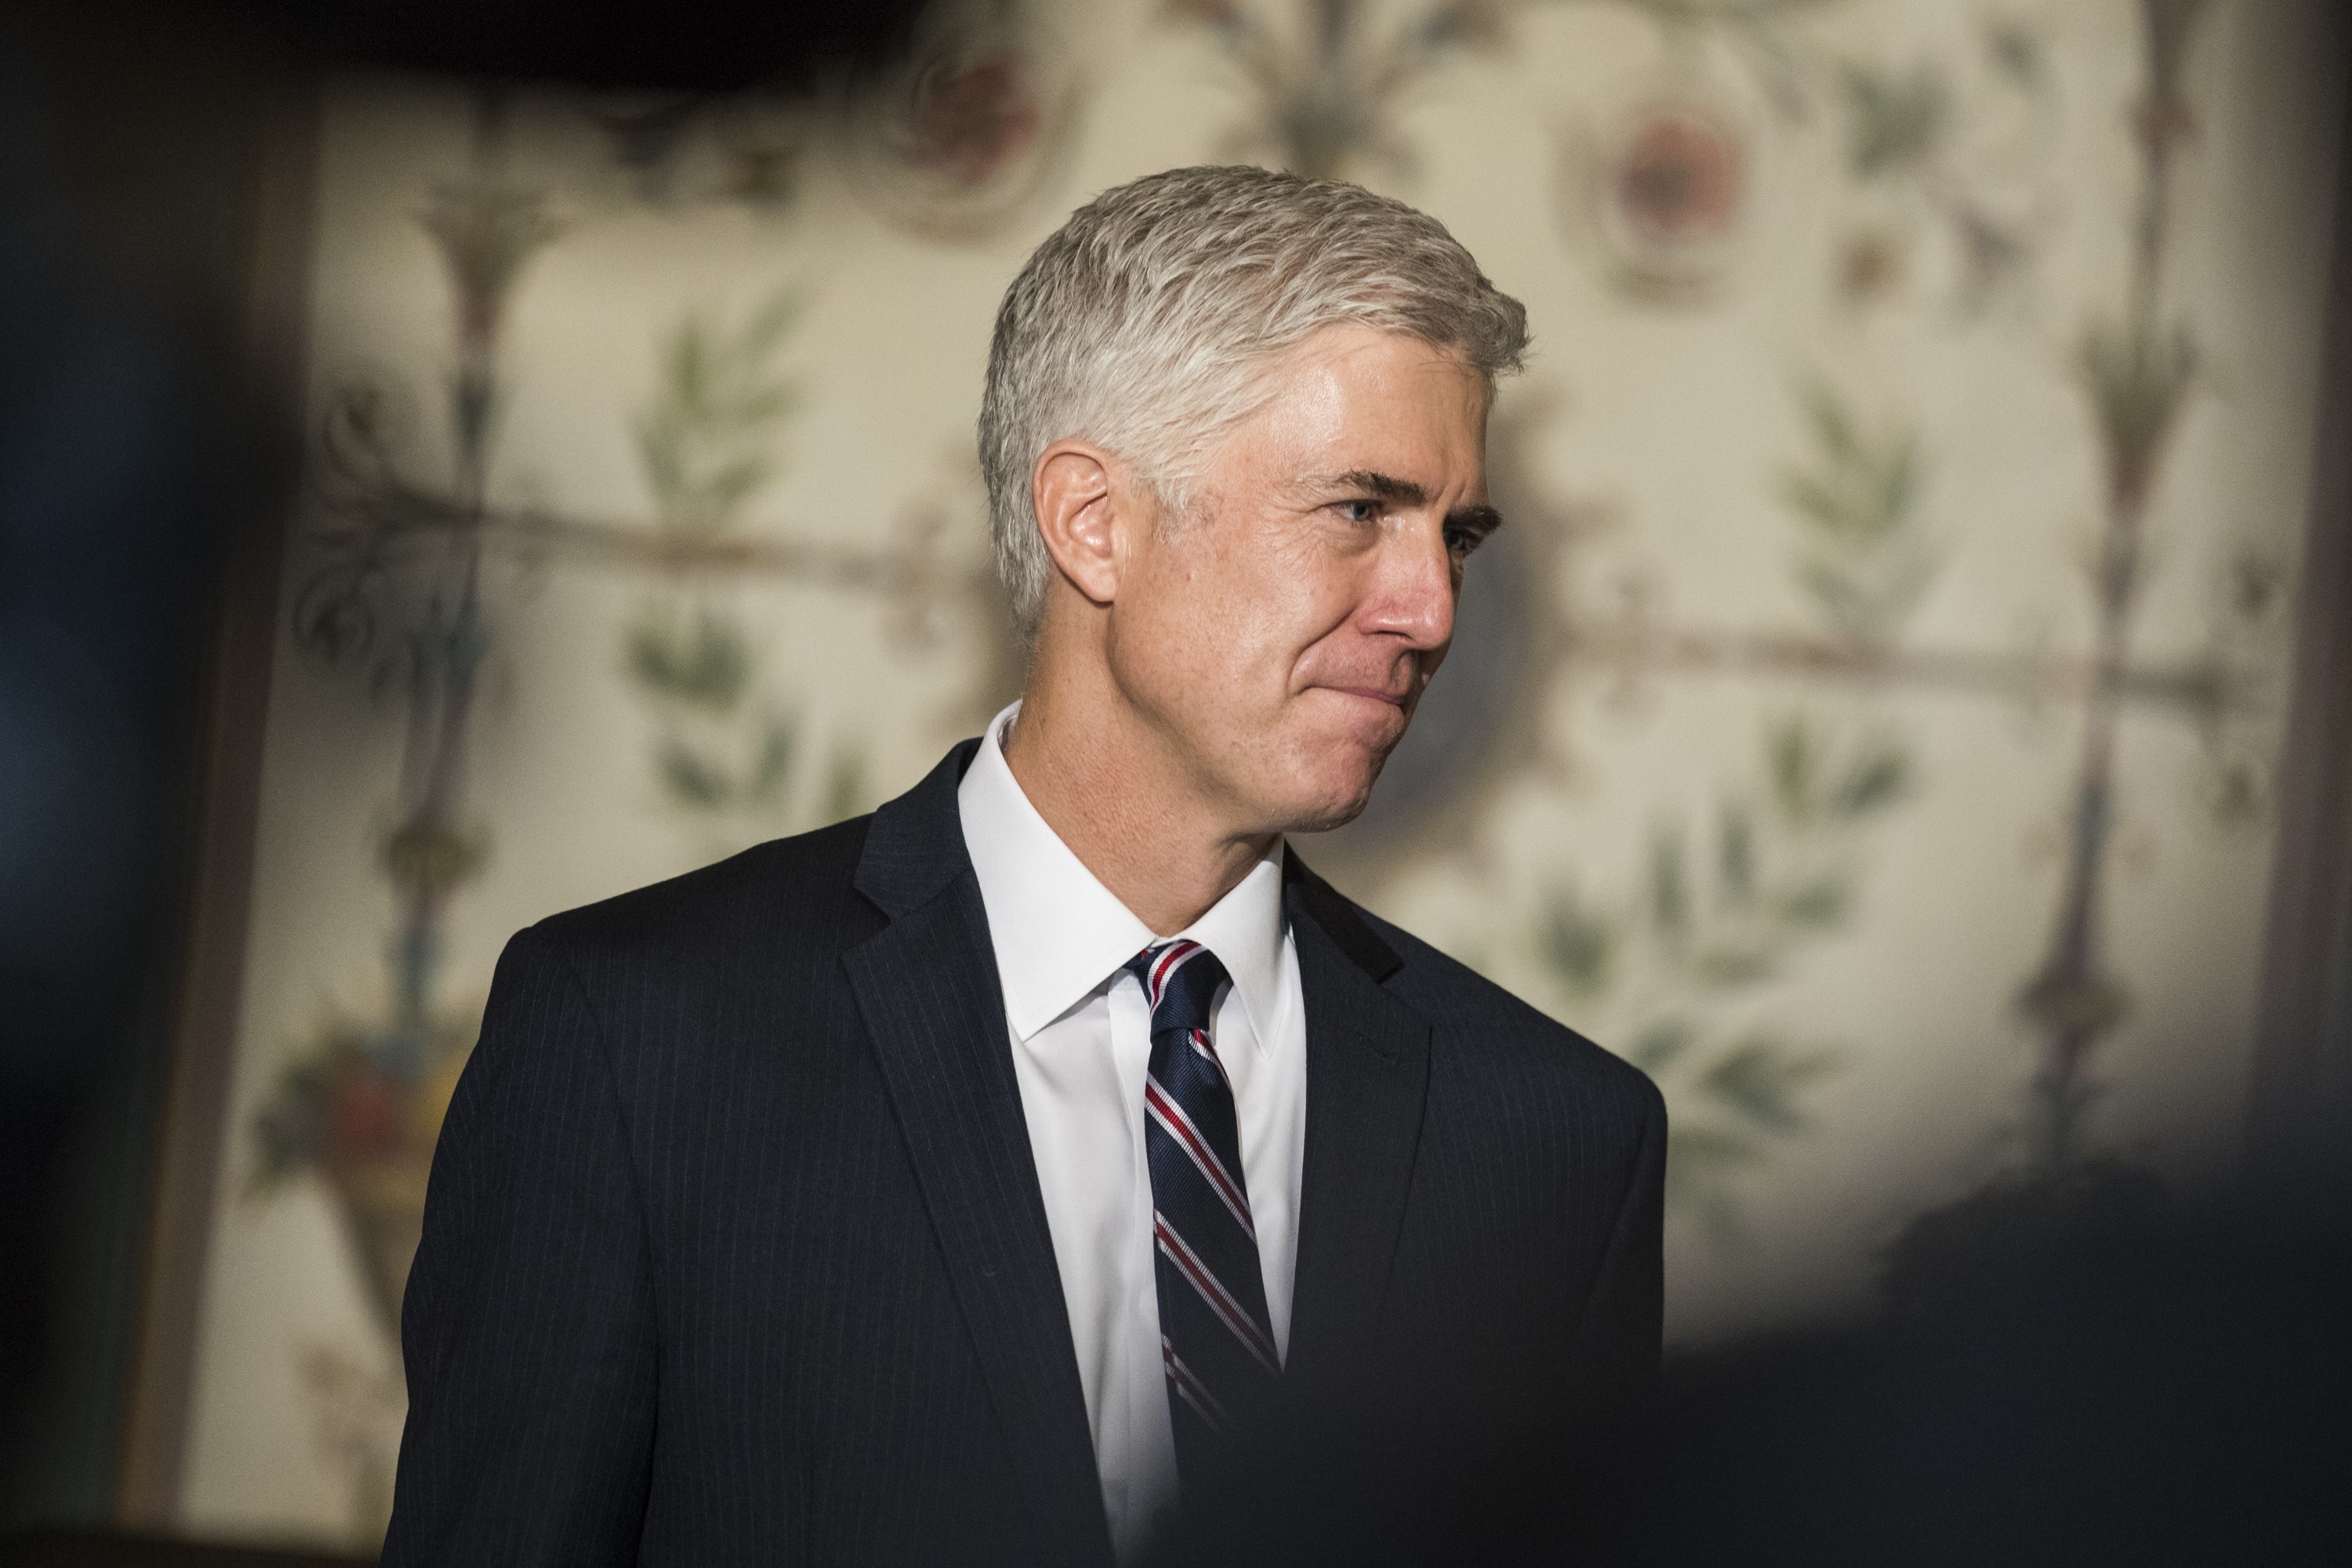 Judge Neil Gorsuch meets with Lawmakers on the Hill